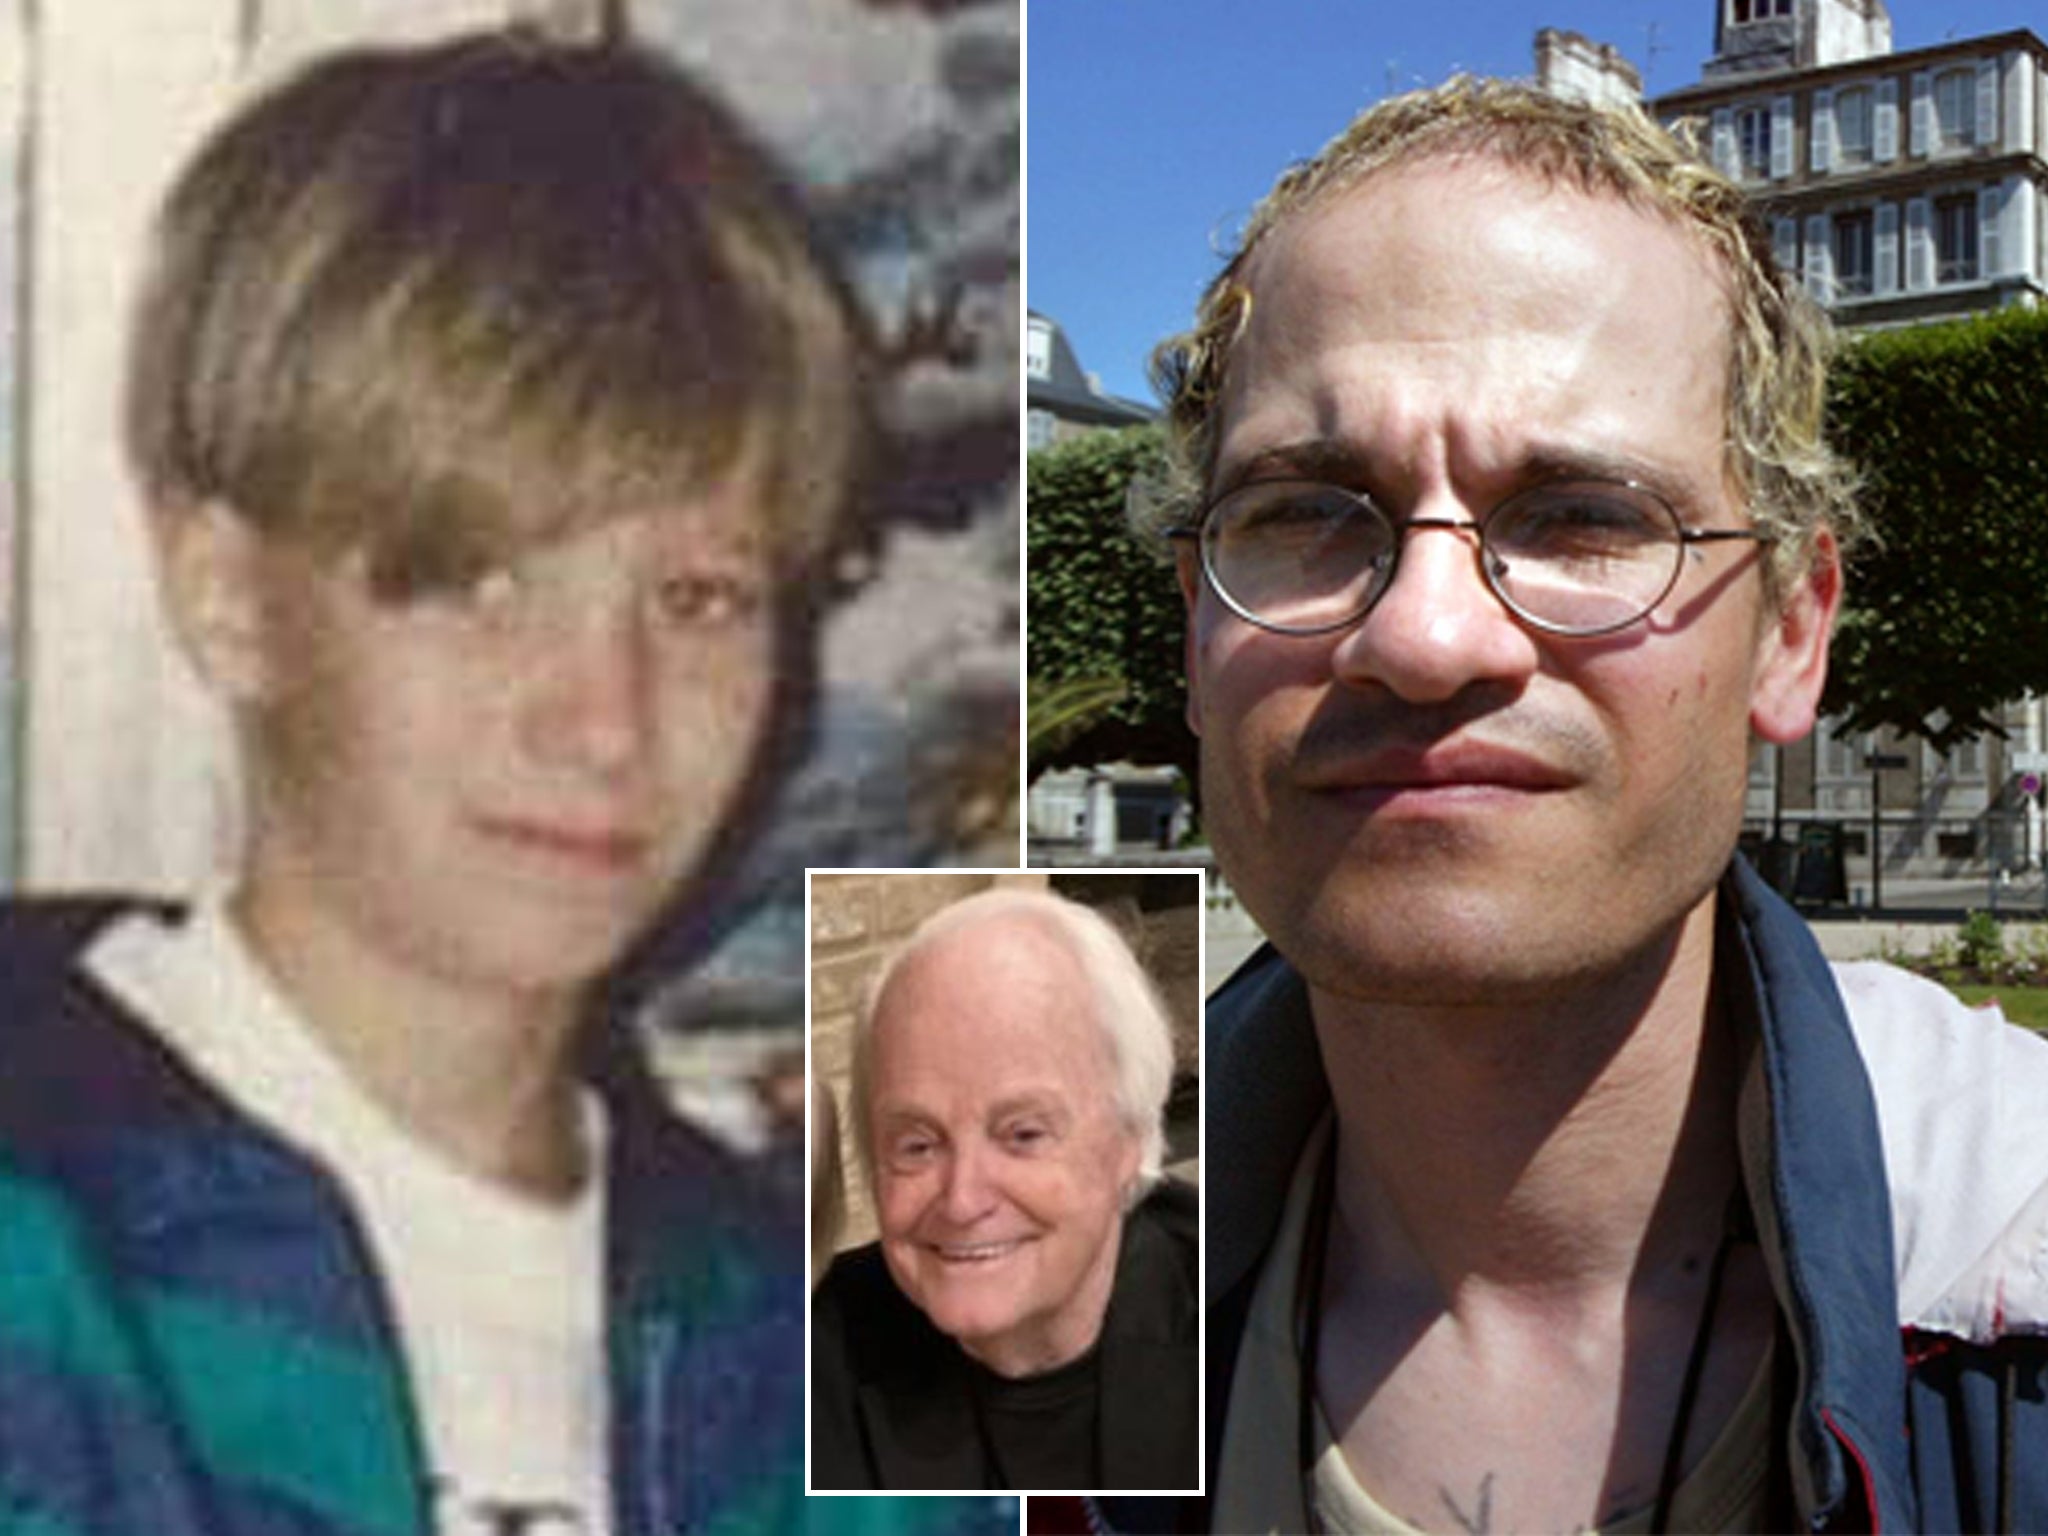 A French imposter convinced everyone he was missing Texas teen Nicholas Barclay image